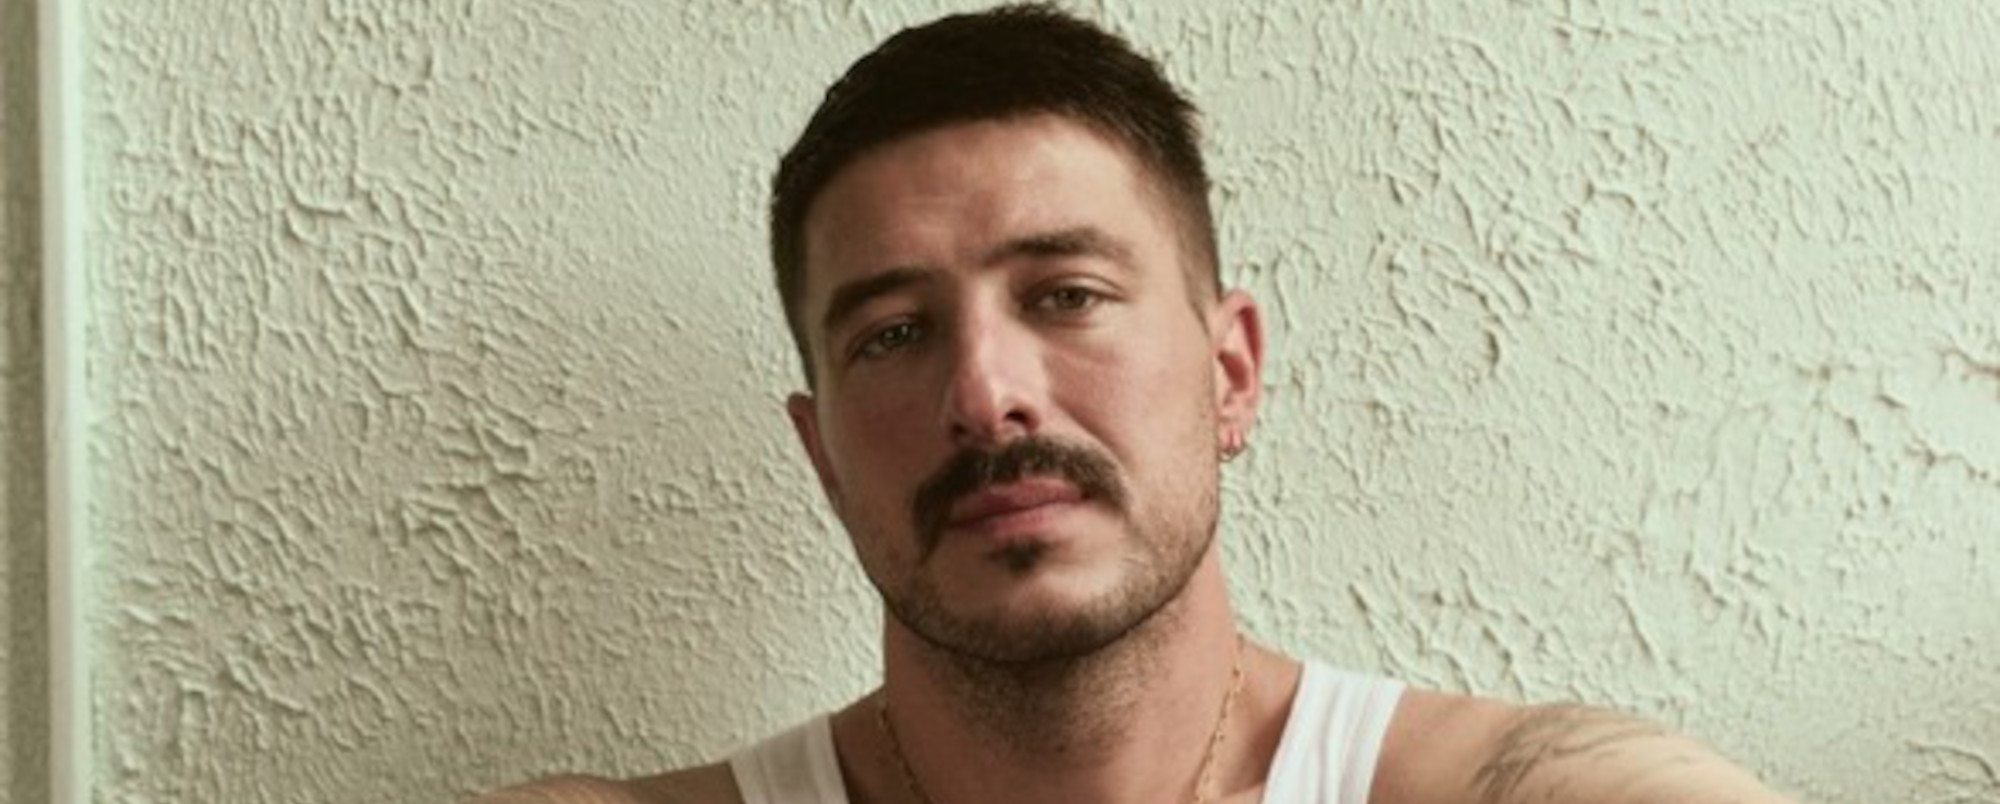 Marcus Mumford Releases New Single, “Better Off High”